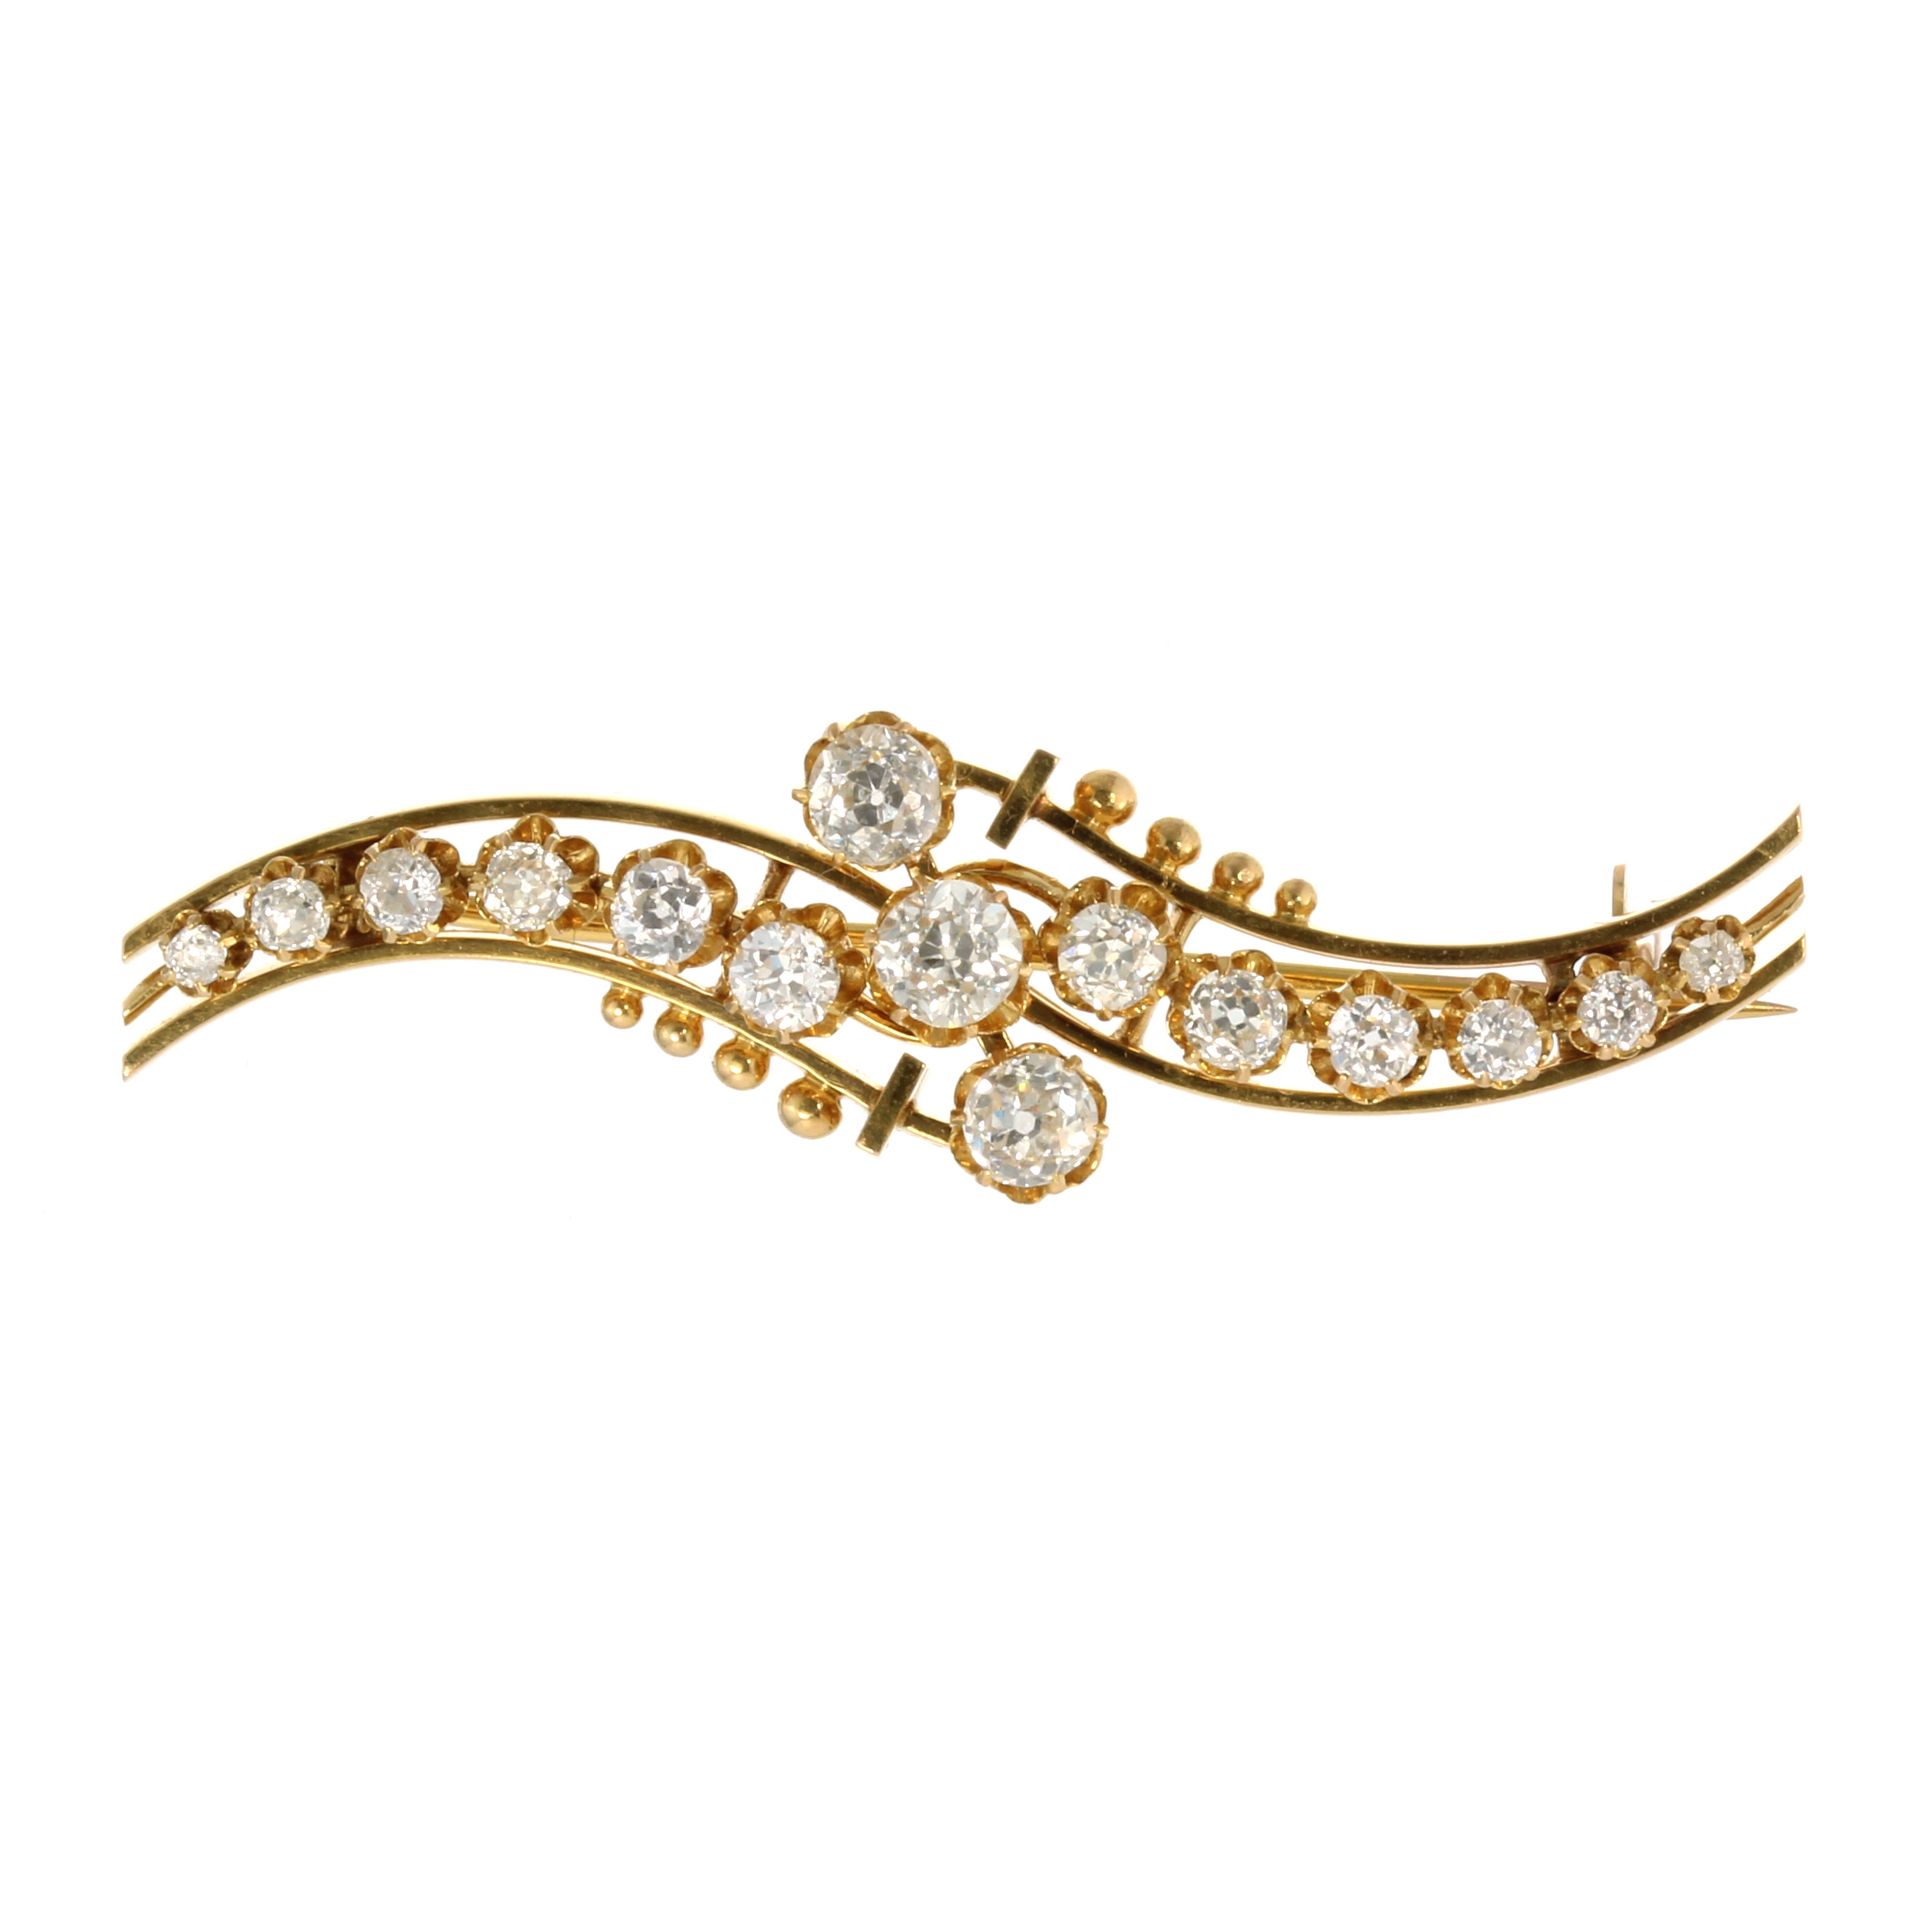 AN ANTIQUE DIAMOND BROOCH set with a central trio of graduated old cut diamonds within an undulating